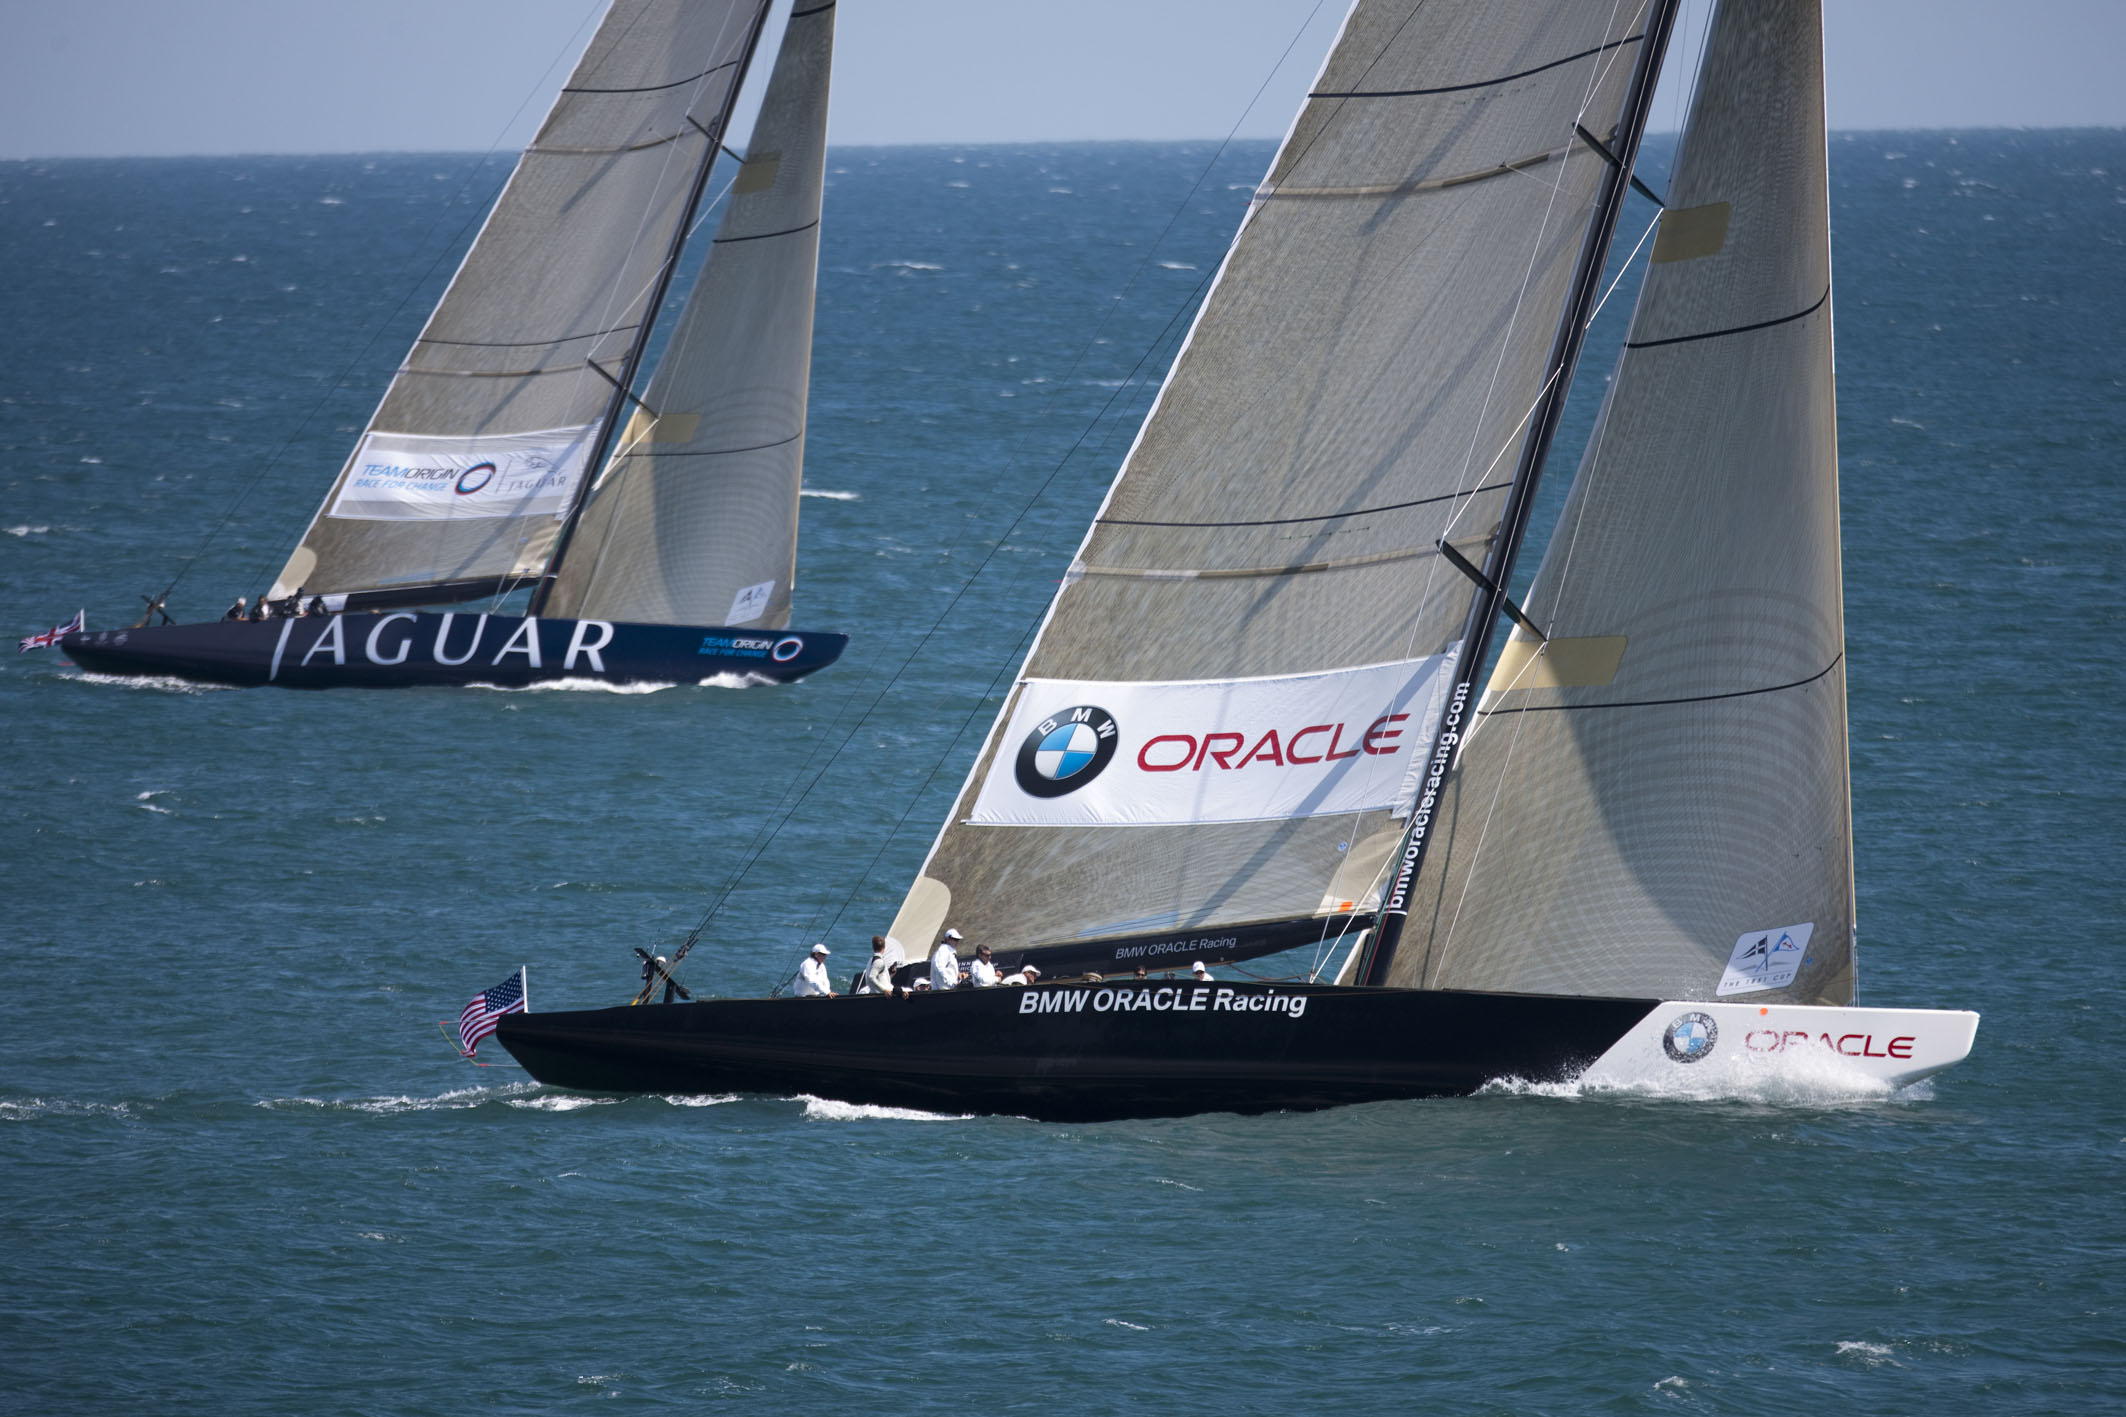 Oracle Yacht Racing http://www.charterworld.com/news/bmw-oracle-wins 